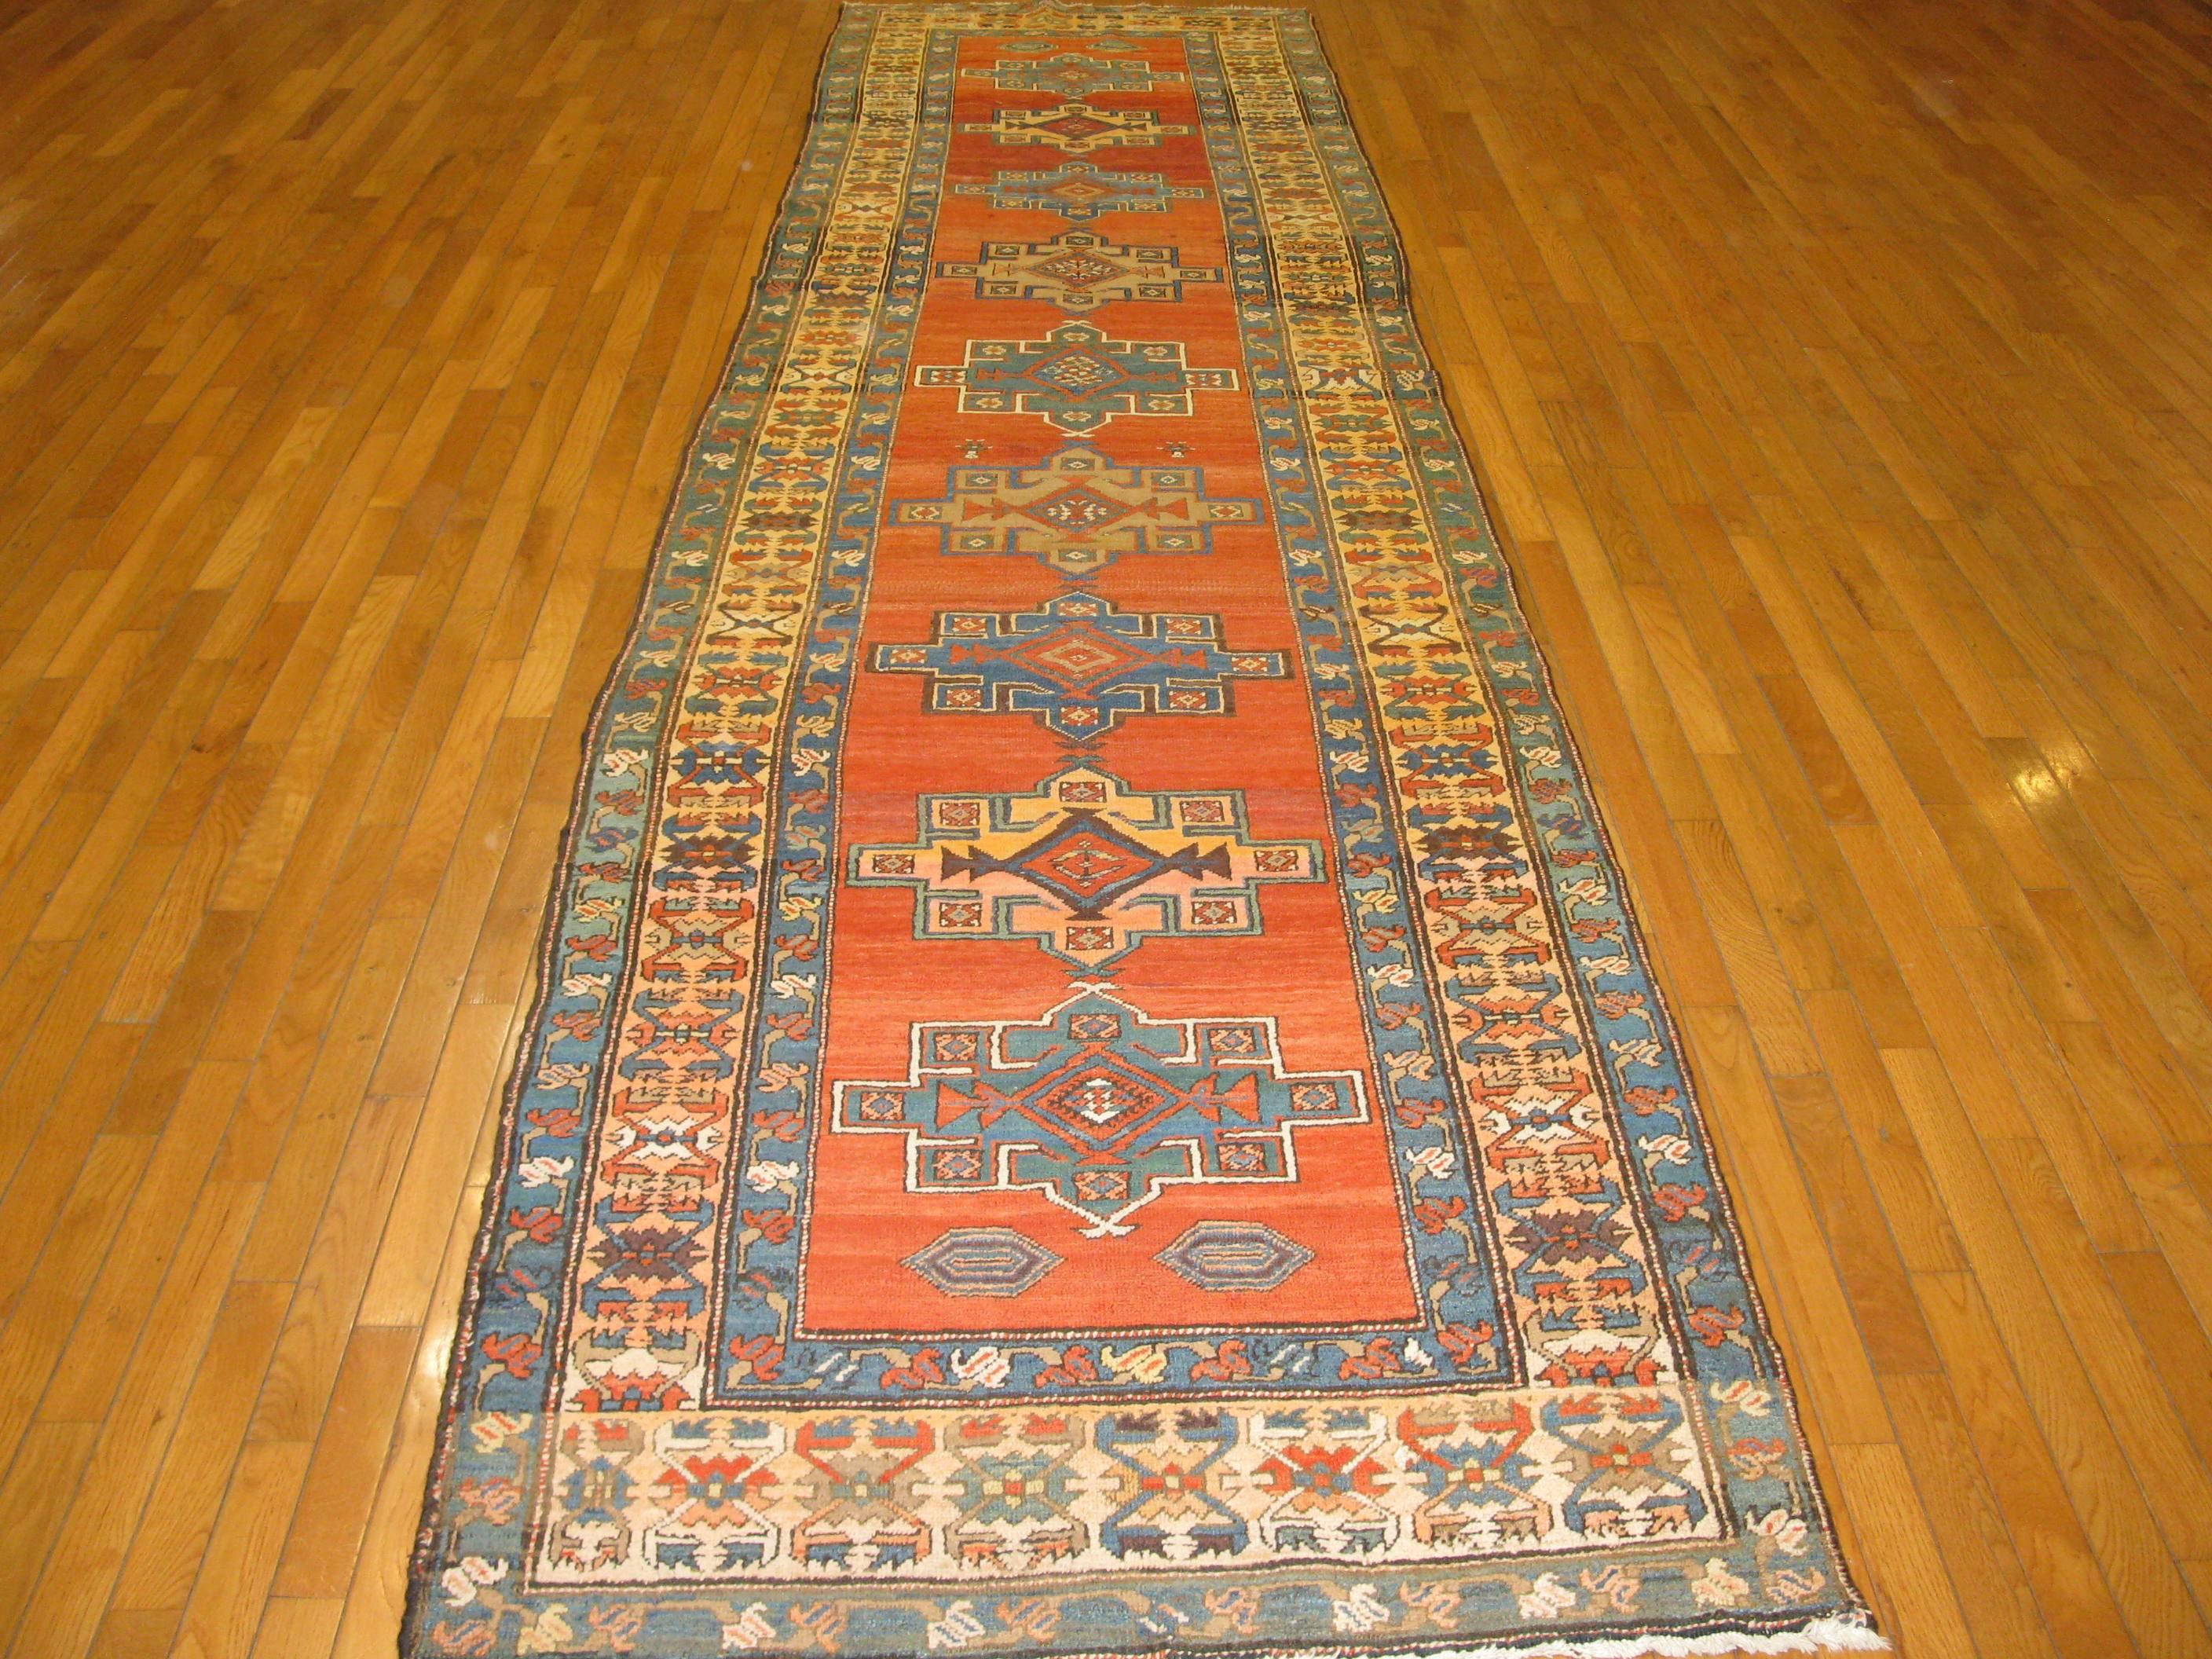 This is a beautiful and rare hand-knotted antique Persian Bakshaesh runne rug. The rug has a simple pattern usually a trademark of the bakshayesh rugs on a red color field. The rug measures 3'7'' x 14' and in very good condition.